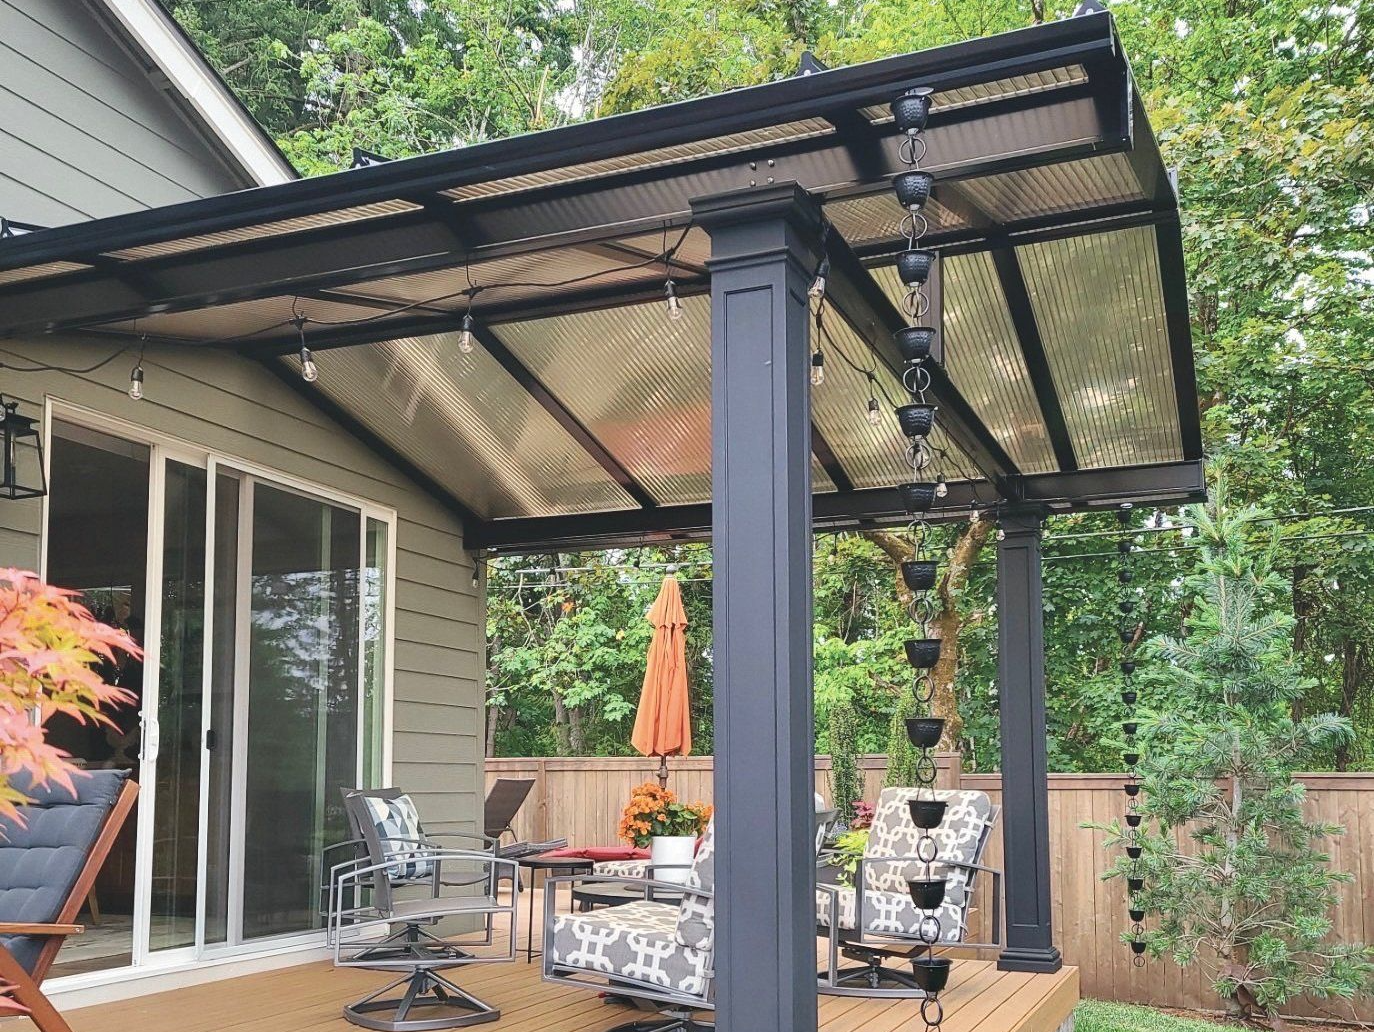 Patio Covers in Skyline Oregon - Gable Roof with ACRYLITE Acrylic